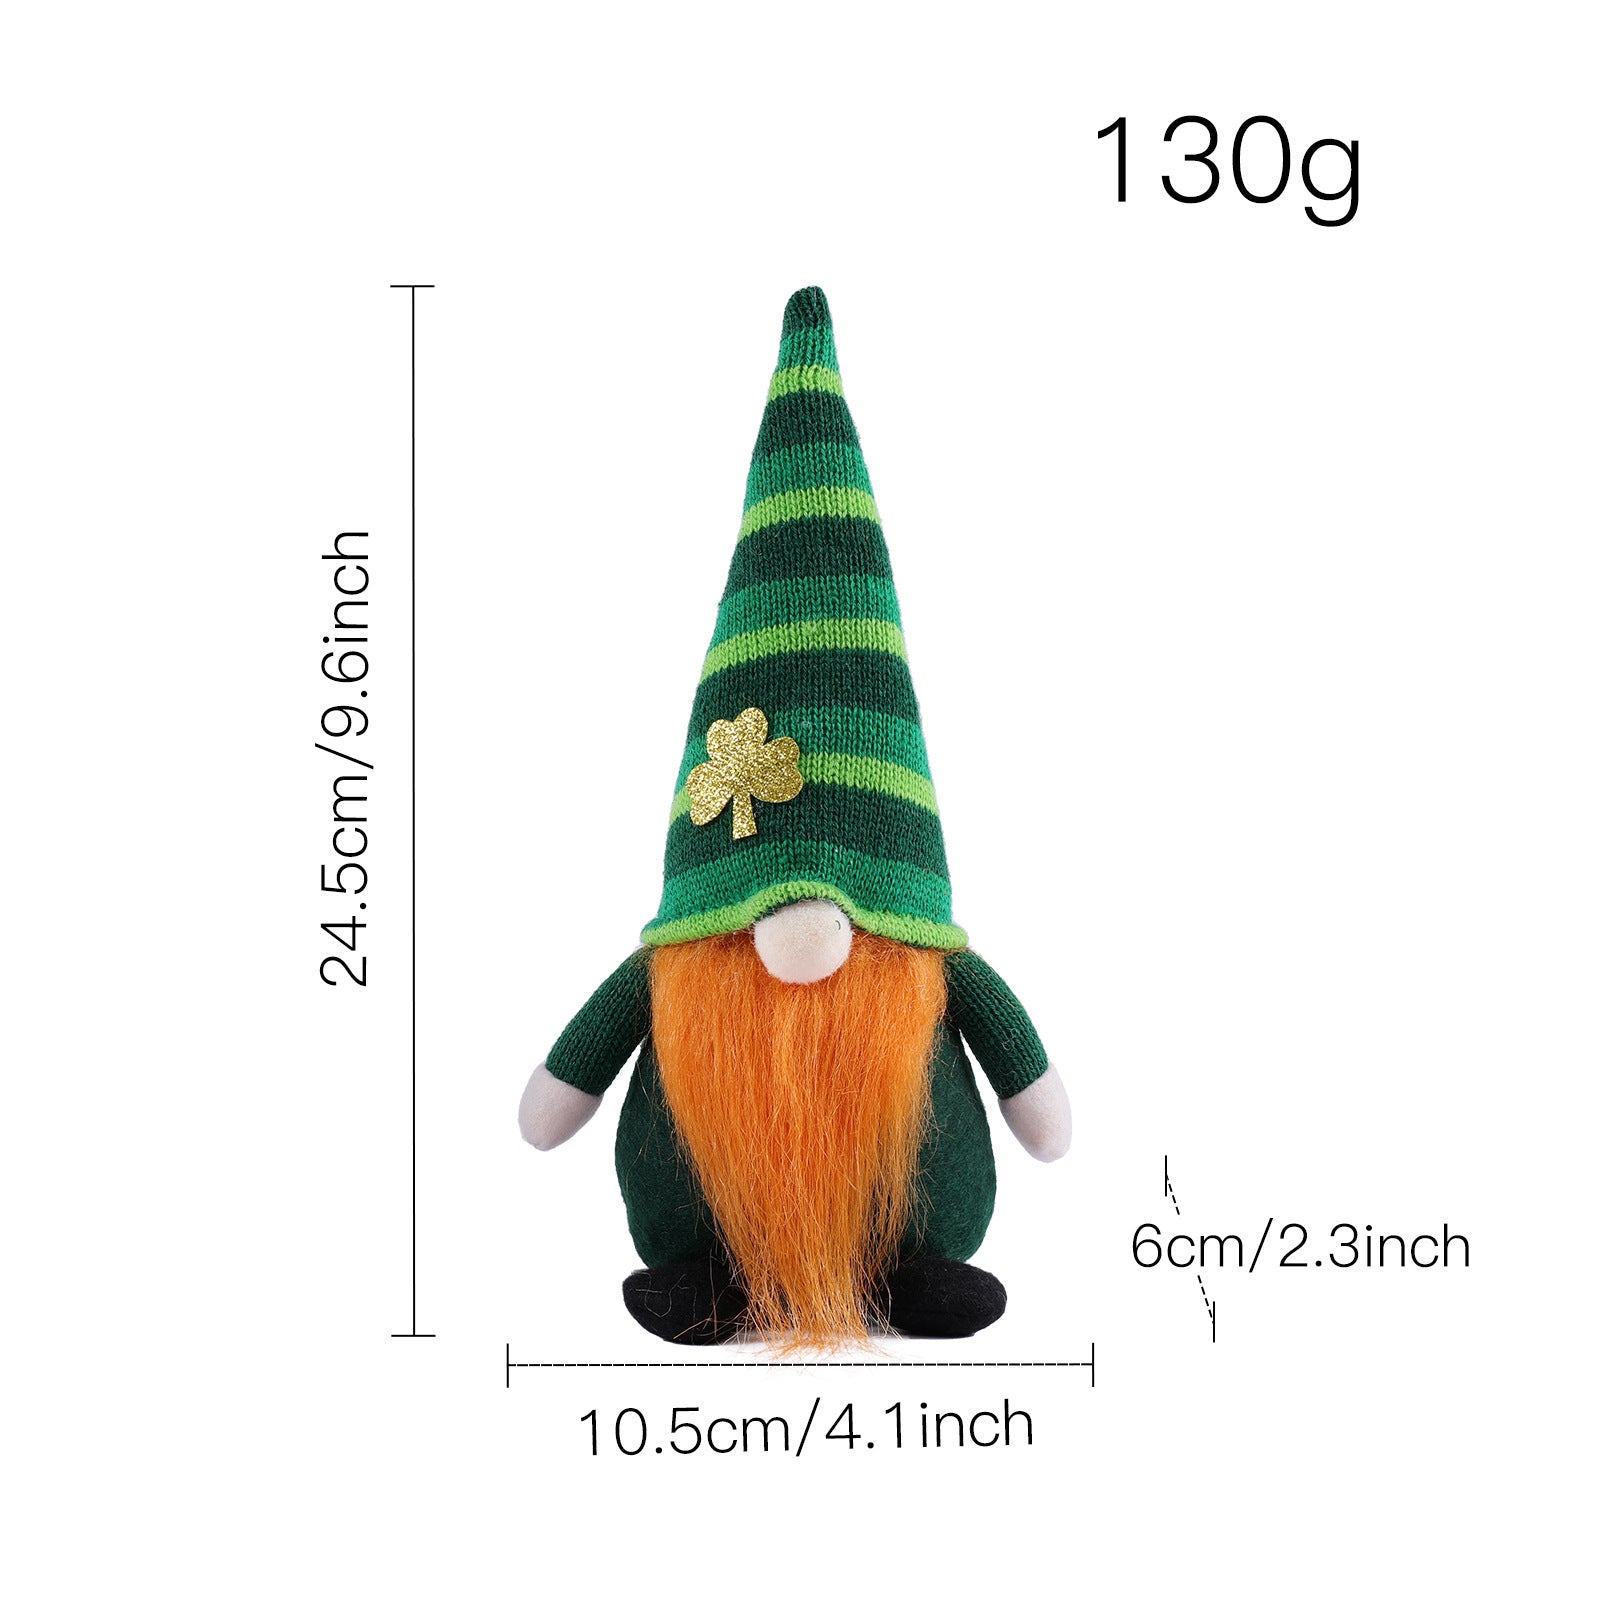 Here We Have Various St. Patrick's Day Gnomes To Sale, St. Patrick's day Handmade Gnomes, st Patricks Gnome Decor Aldi, St Patricks Gnome Decor, Leprechaun gnome, St Patrick gnome, Gnome st Patrick's day, st patty's day gnome, St Patrick's day gnome DIY, St patty gnomes, Happy st Patrick's day gnome